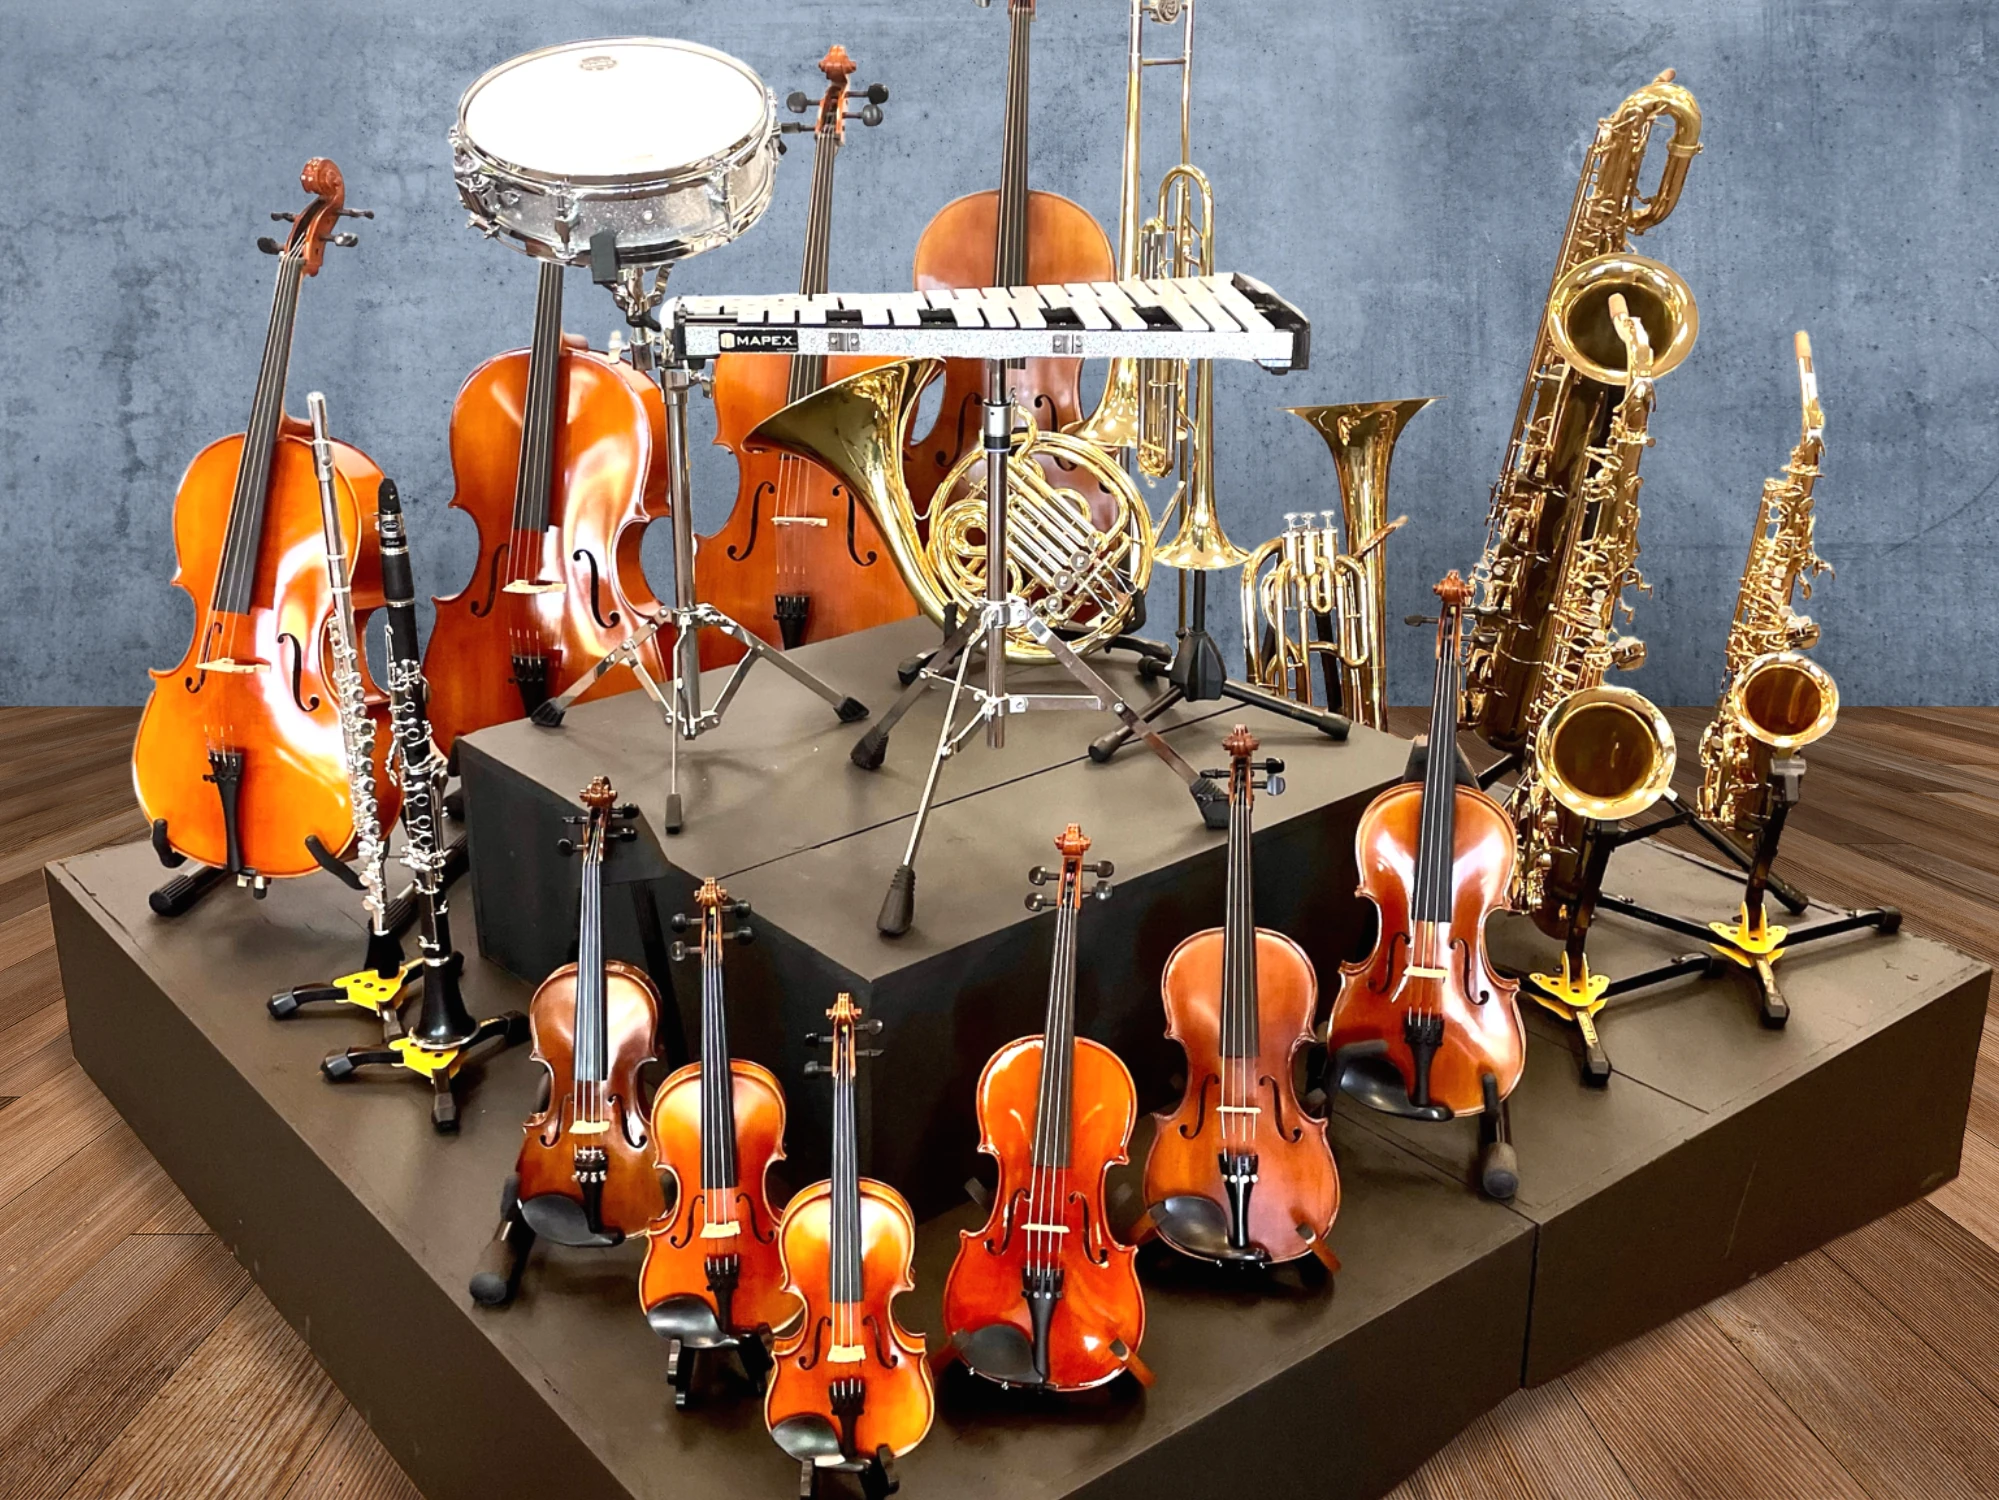 The Magic Flute rents high quality band and orchestra instruments for Marin school music programs at the best rental rates.
